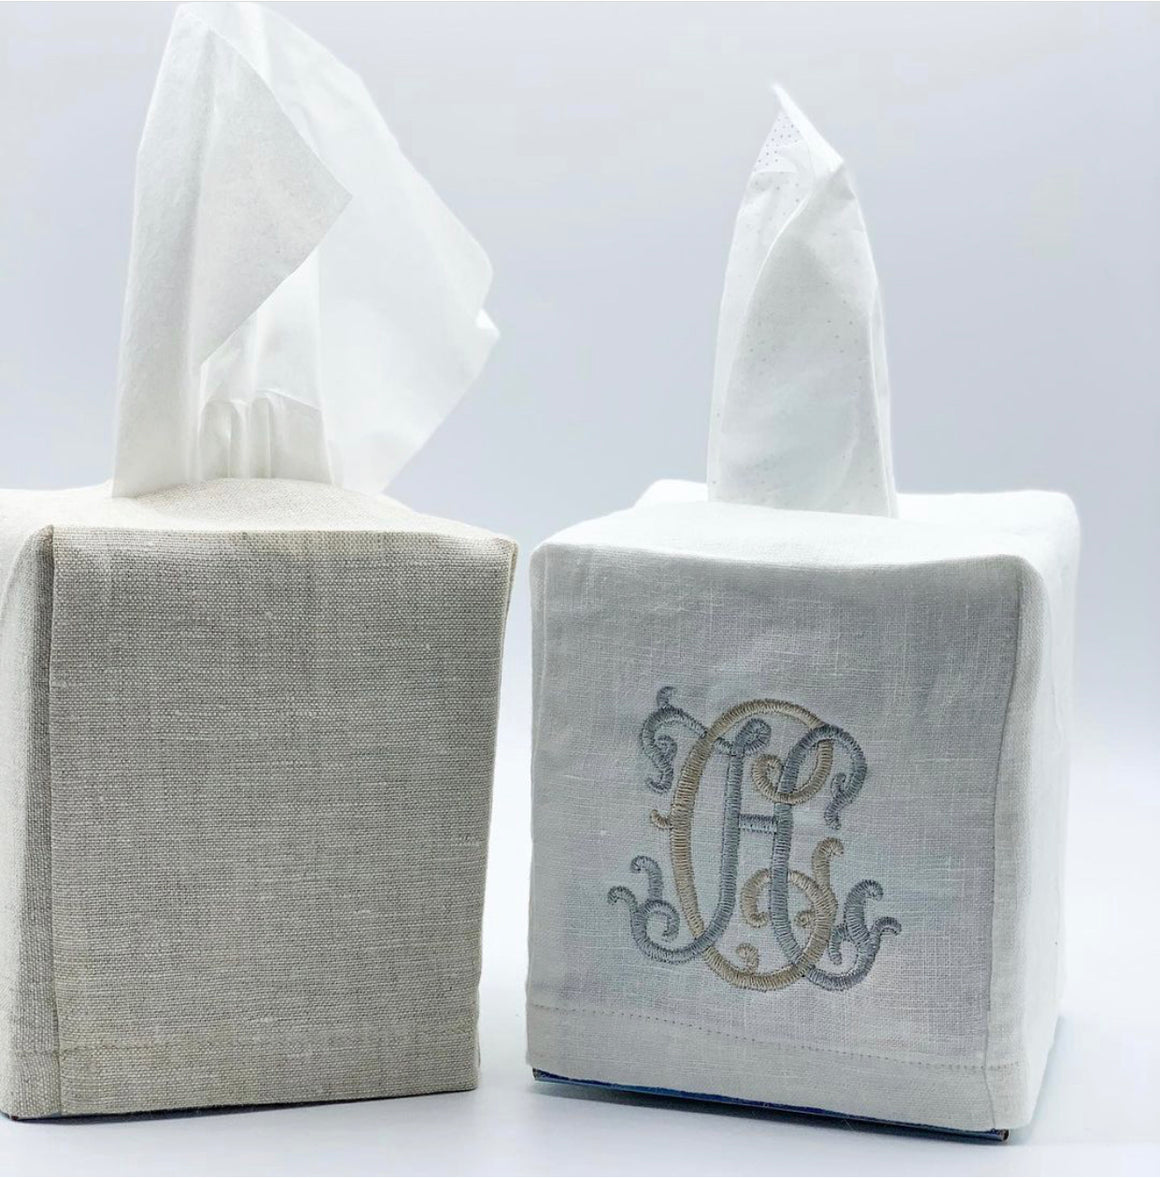 Linen Tissue Box Covers - White or Natural